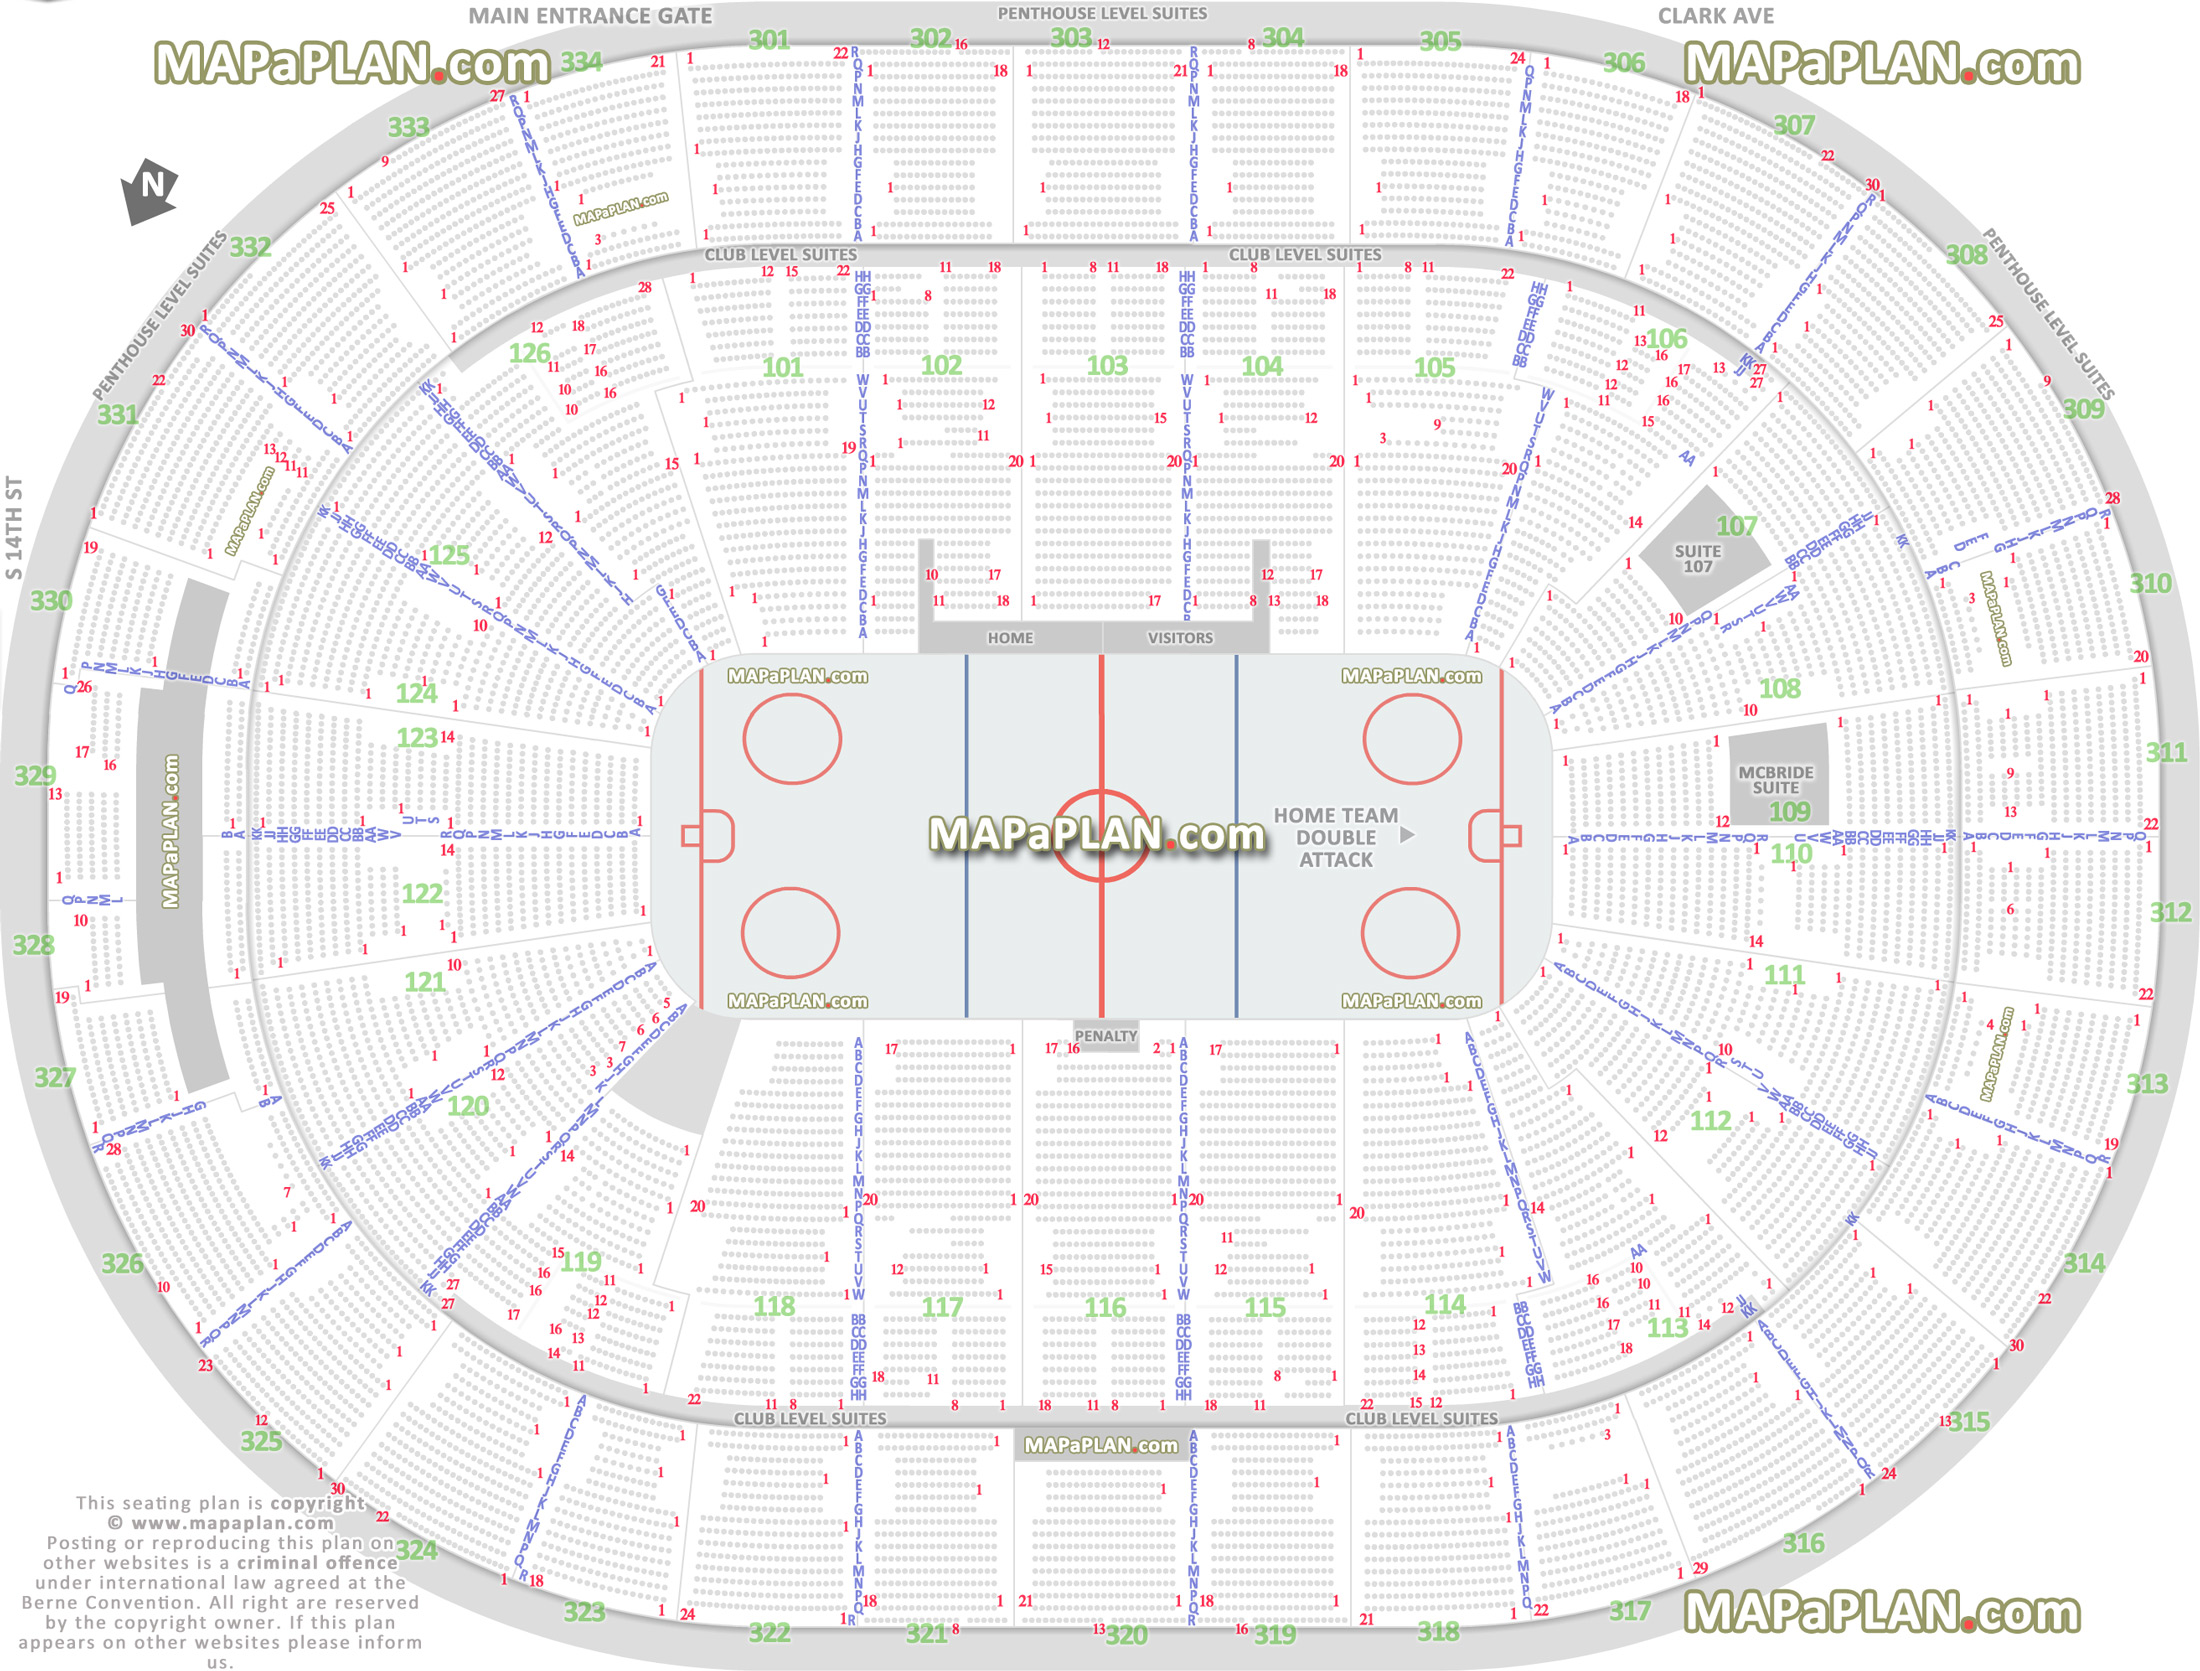 Enterprise Center Seating Chart With Rows